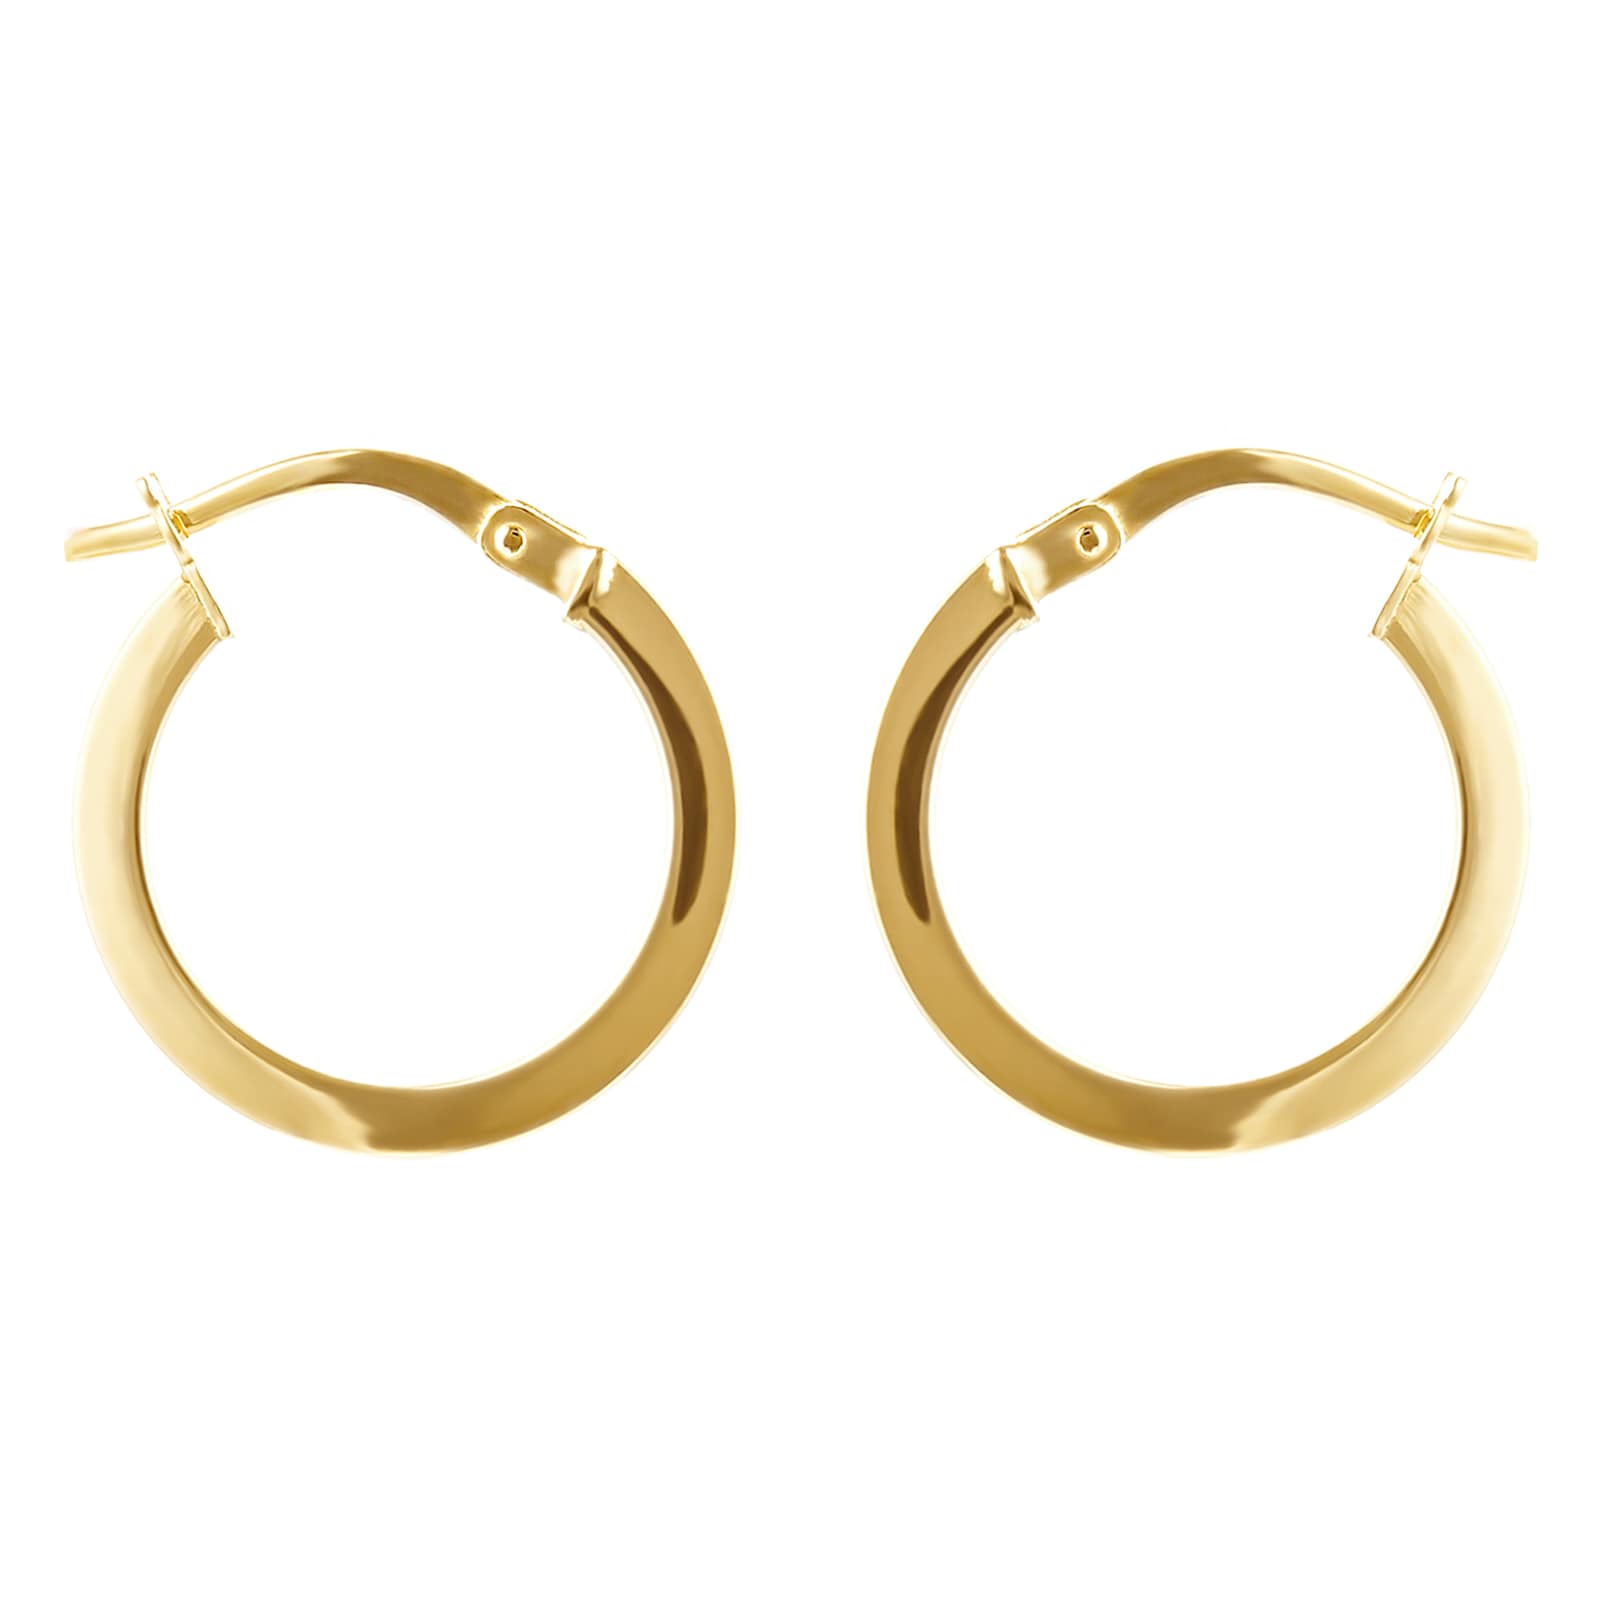 Goldsmiths 9ct Yellow Gold 16mm Small Hoop Earrings 1.52.7609 | Goldsmiths